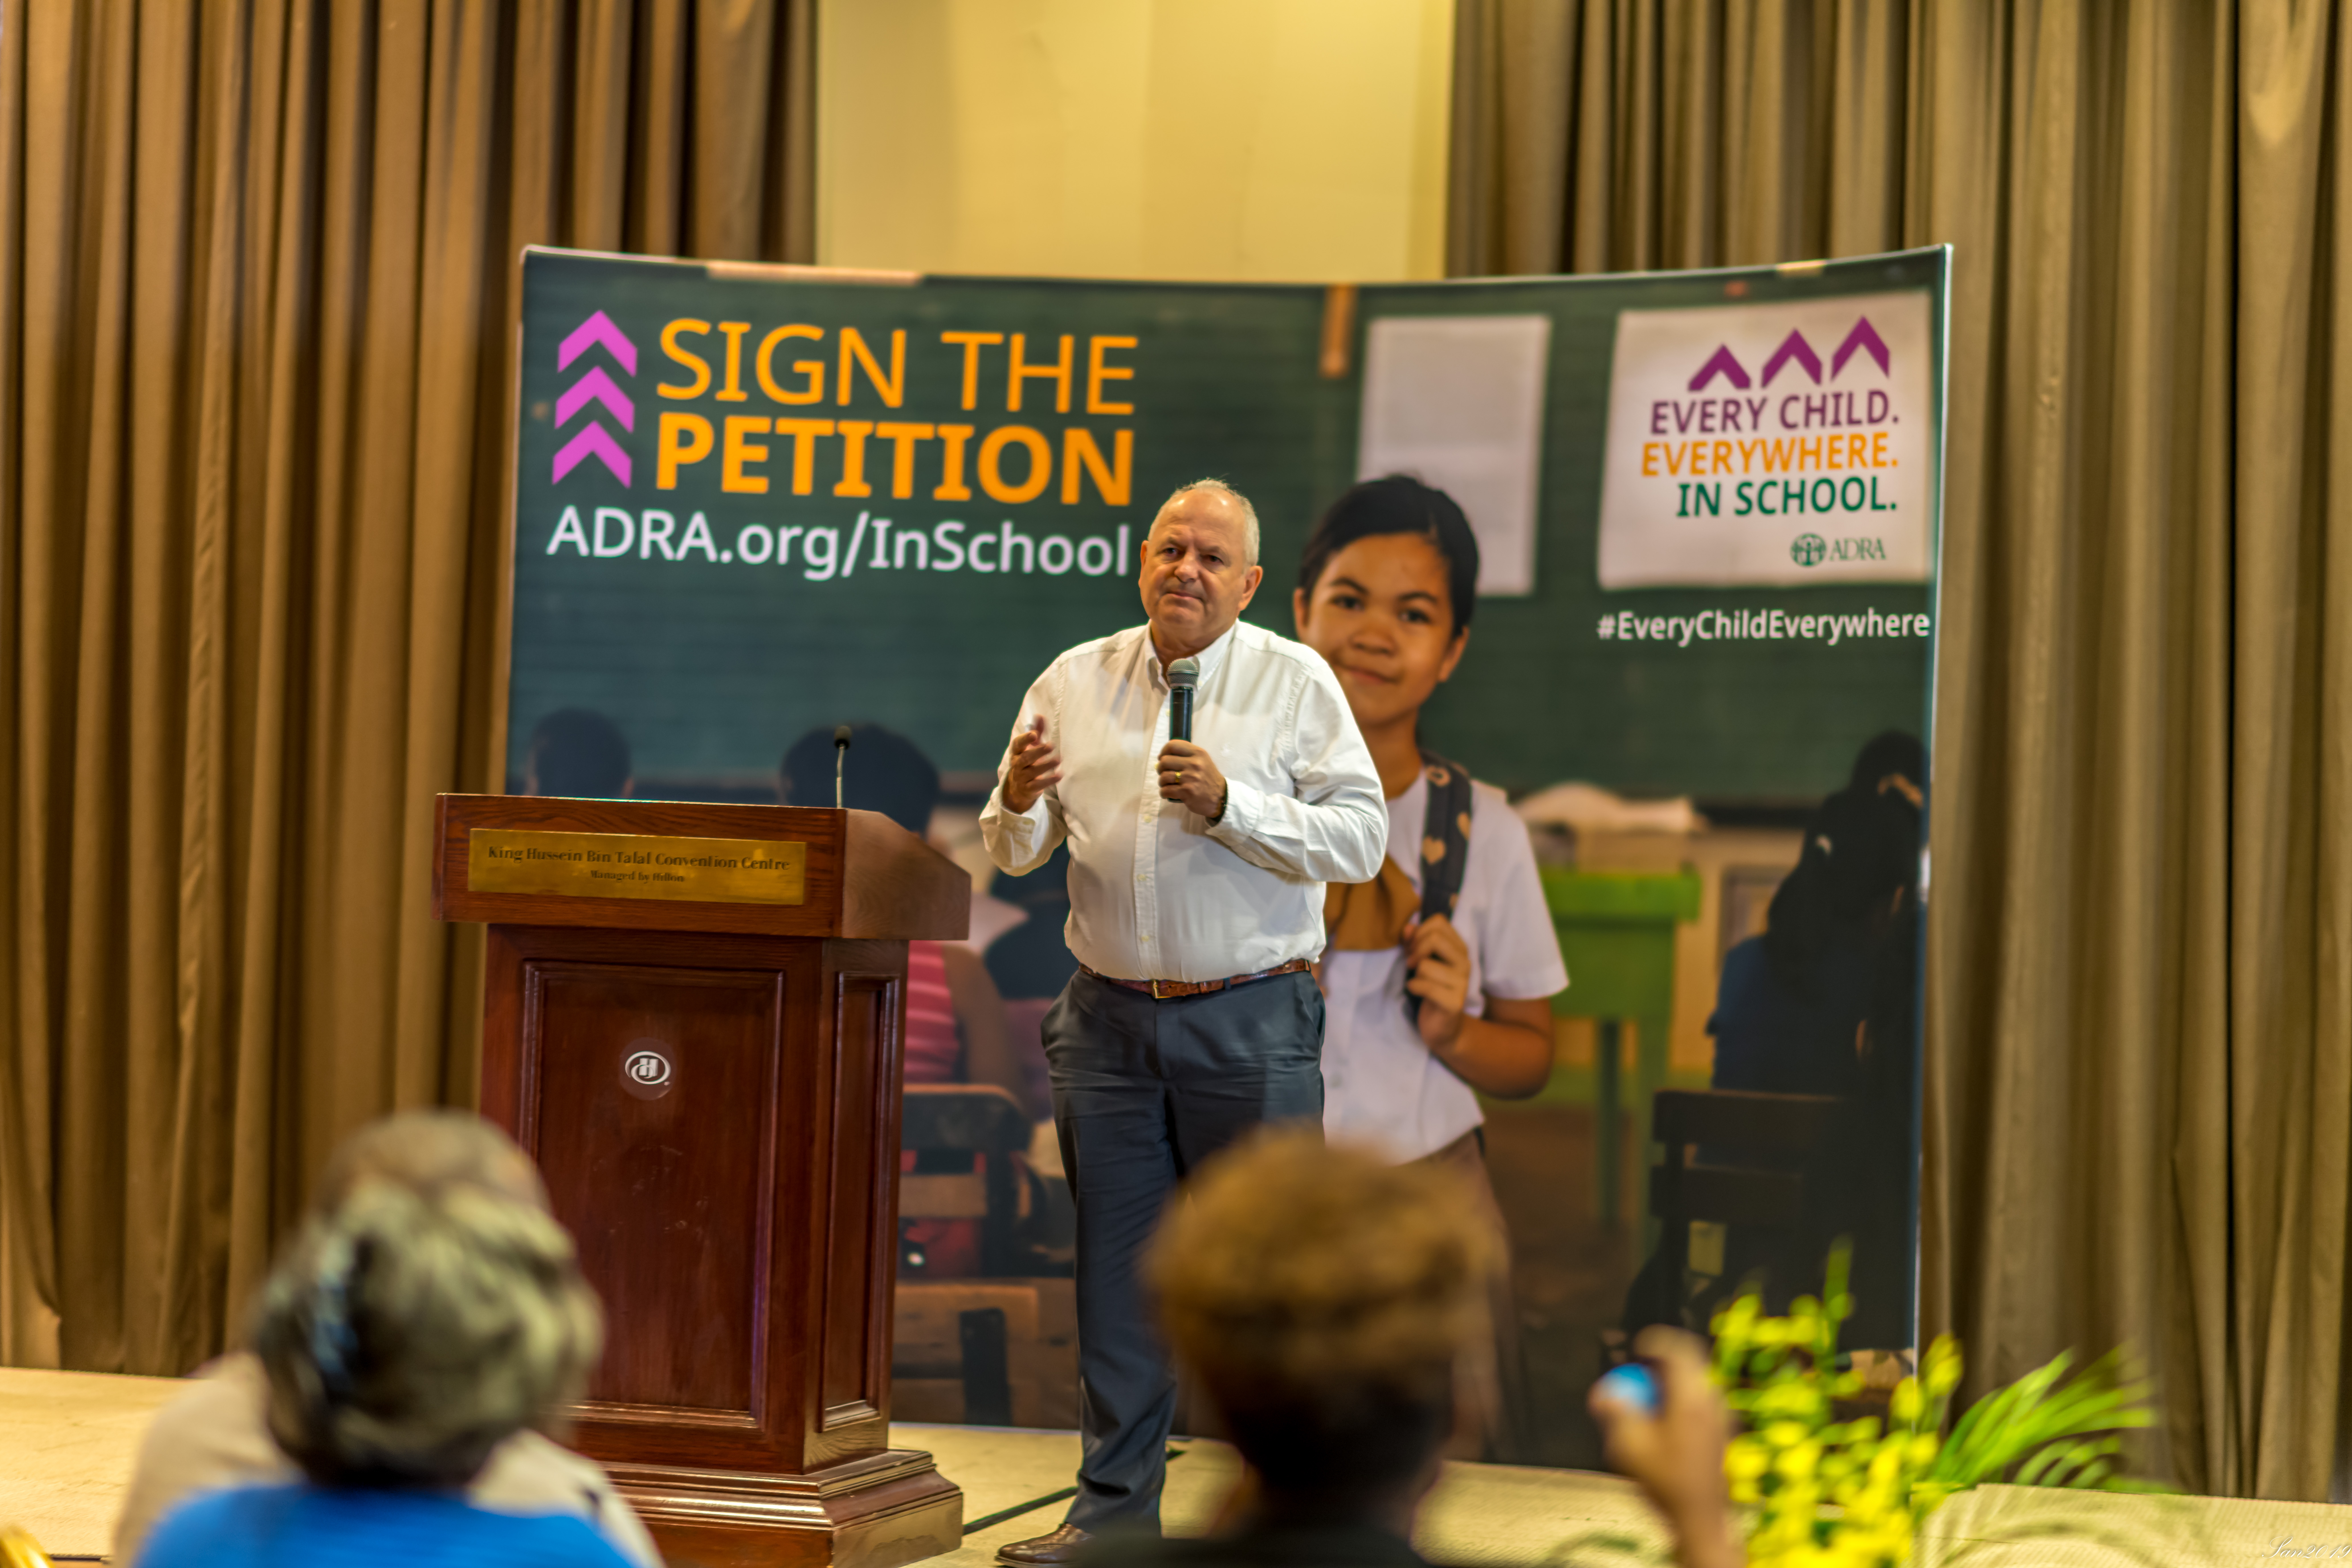 Jonathan Duffy announces ADRA's new global advocacy campaign, "Every Child. Everywhere. In School.", during GAiN meetings in Jordan. Photo provided by the Adventist Development and Relief Agency